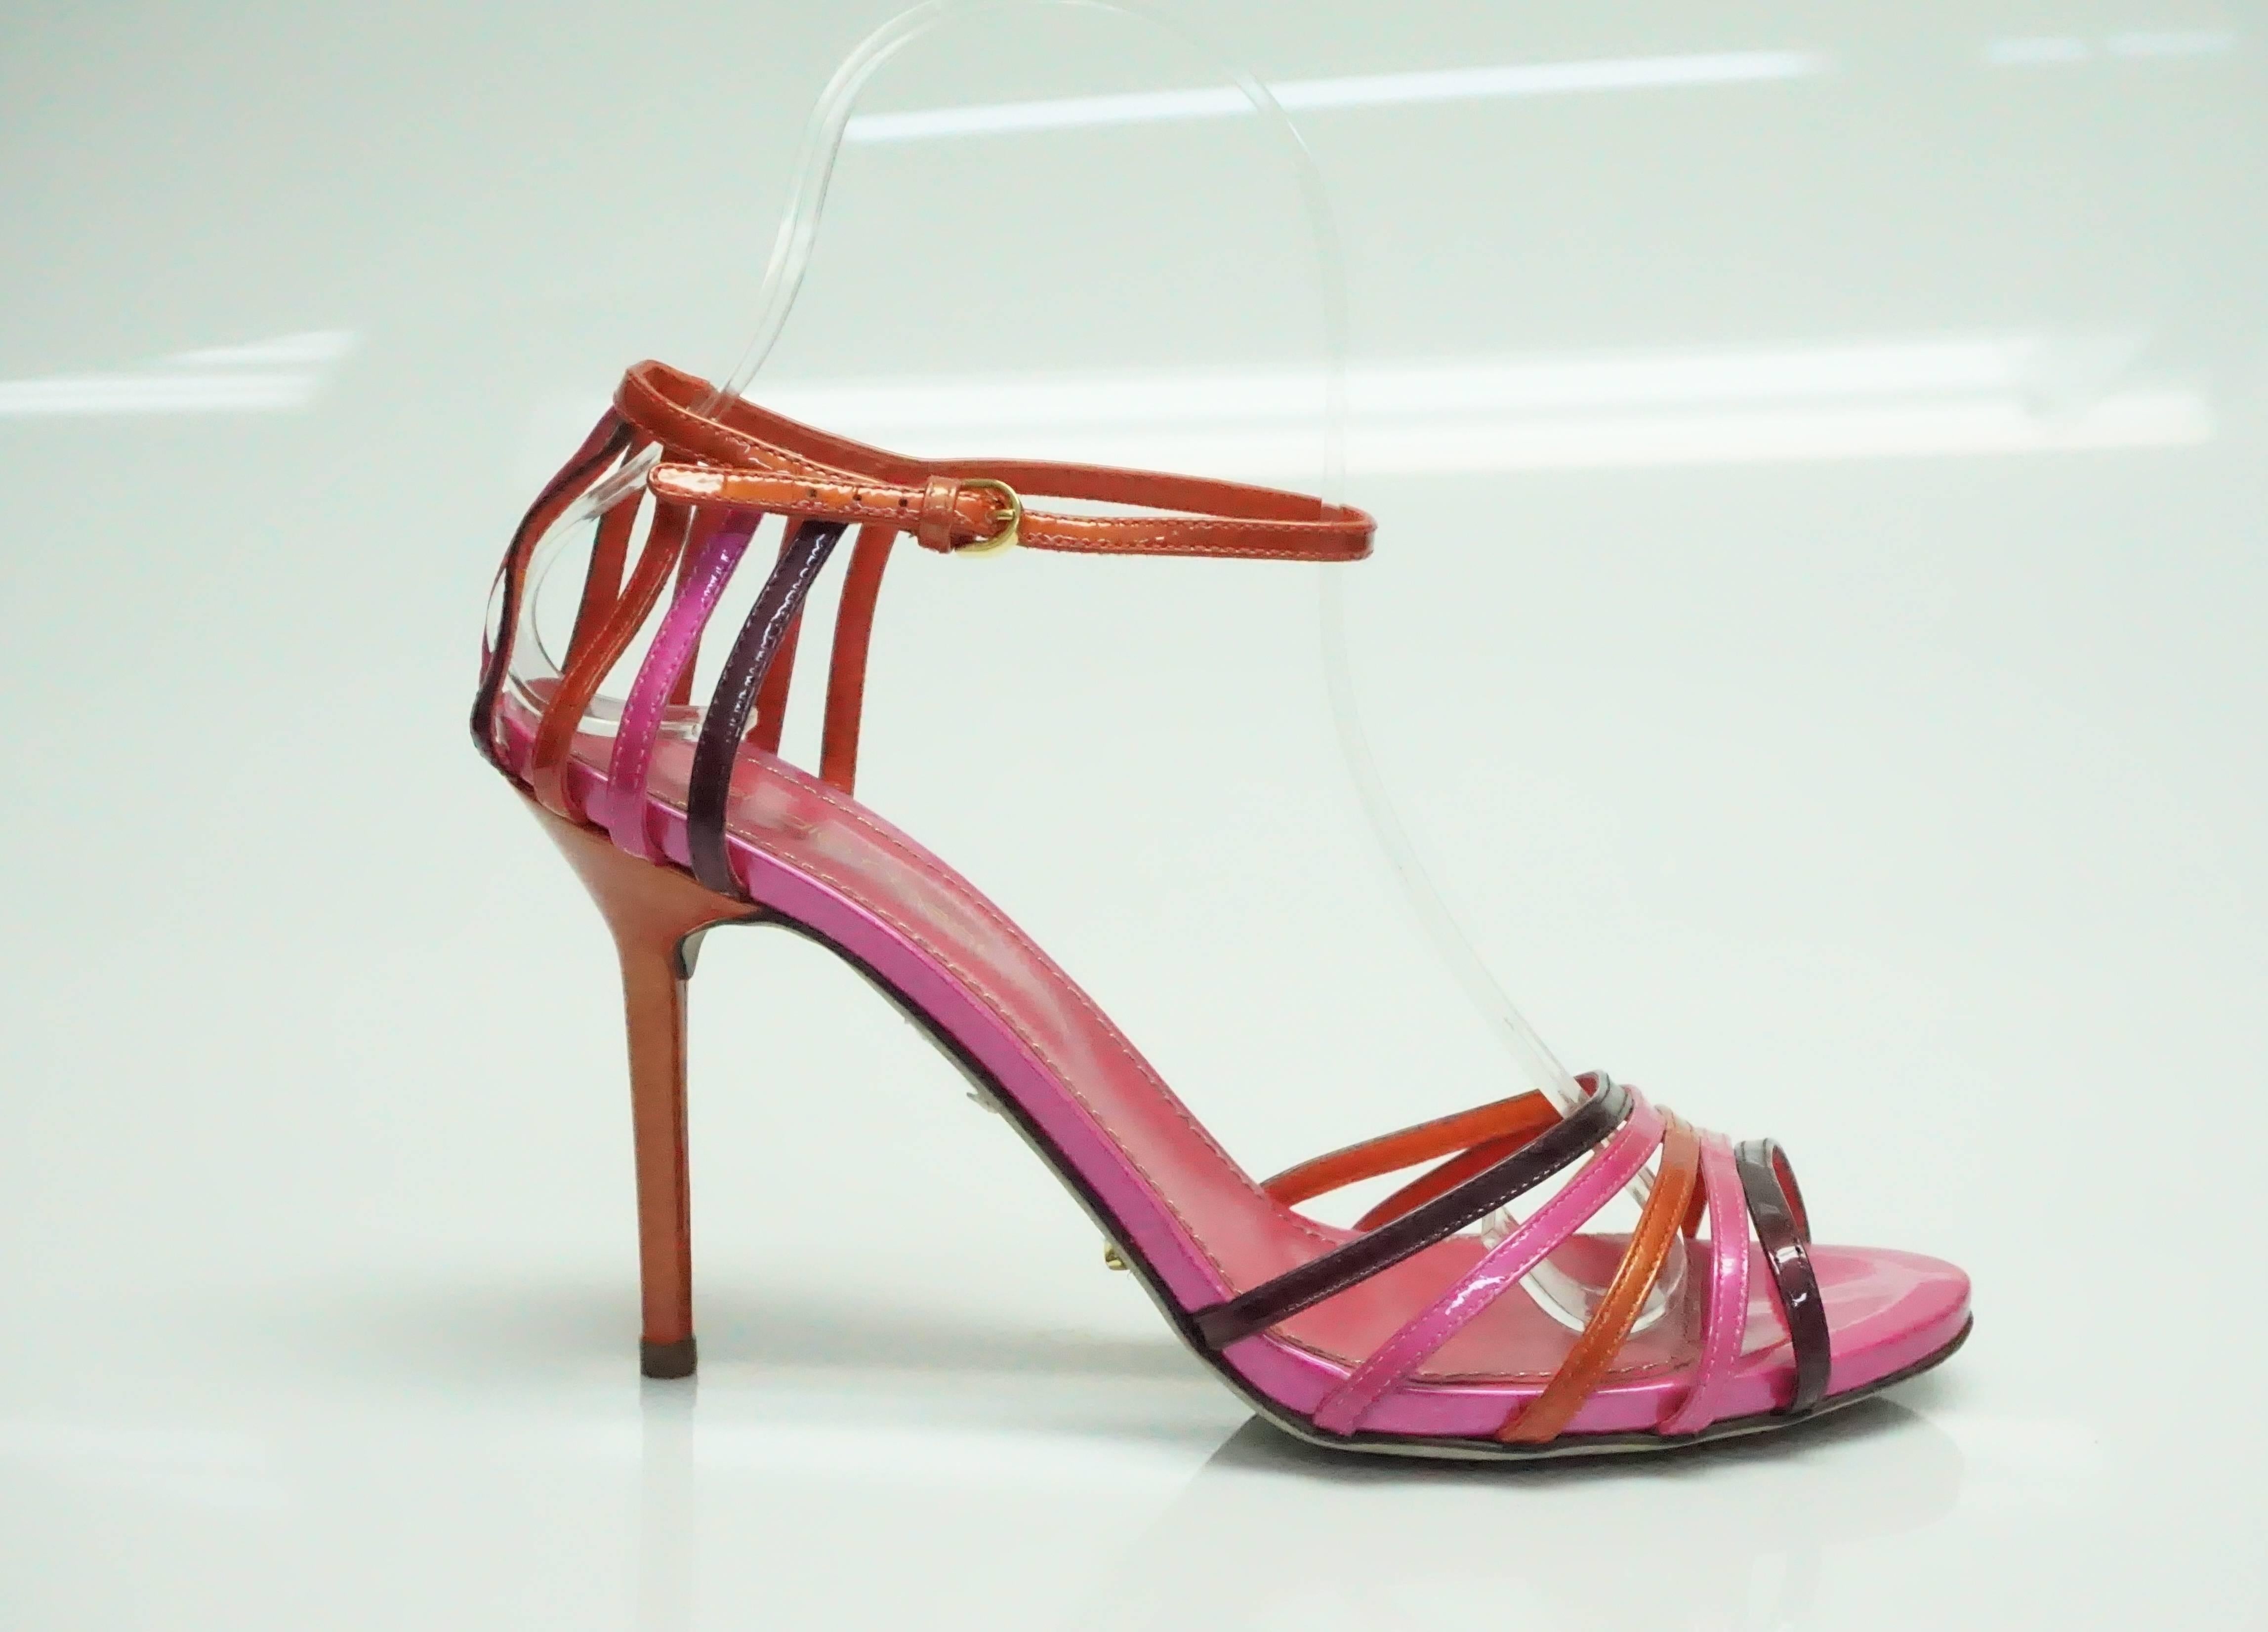 Sergio Rossi Pink and Orange Patent Strappy Sandal - 37  These beautiful and vibrant colored shoes are in excellent condition. The colors consist of orange, pink, and purple patent leather. The back of the heel has a strappy detail and is connected